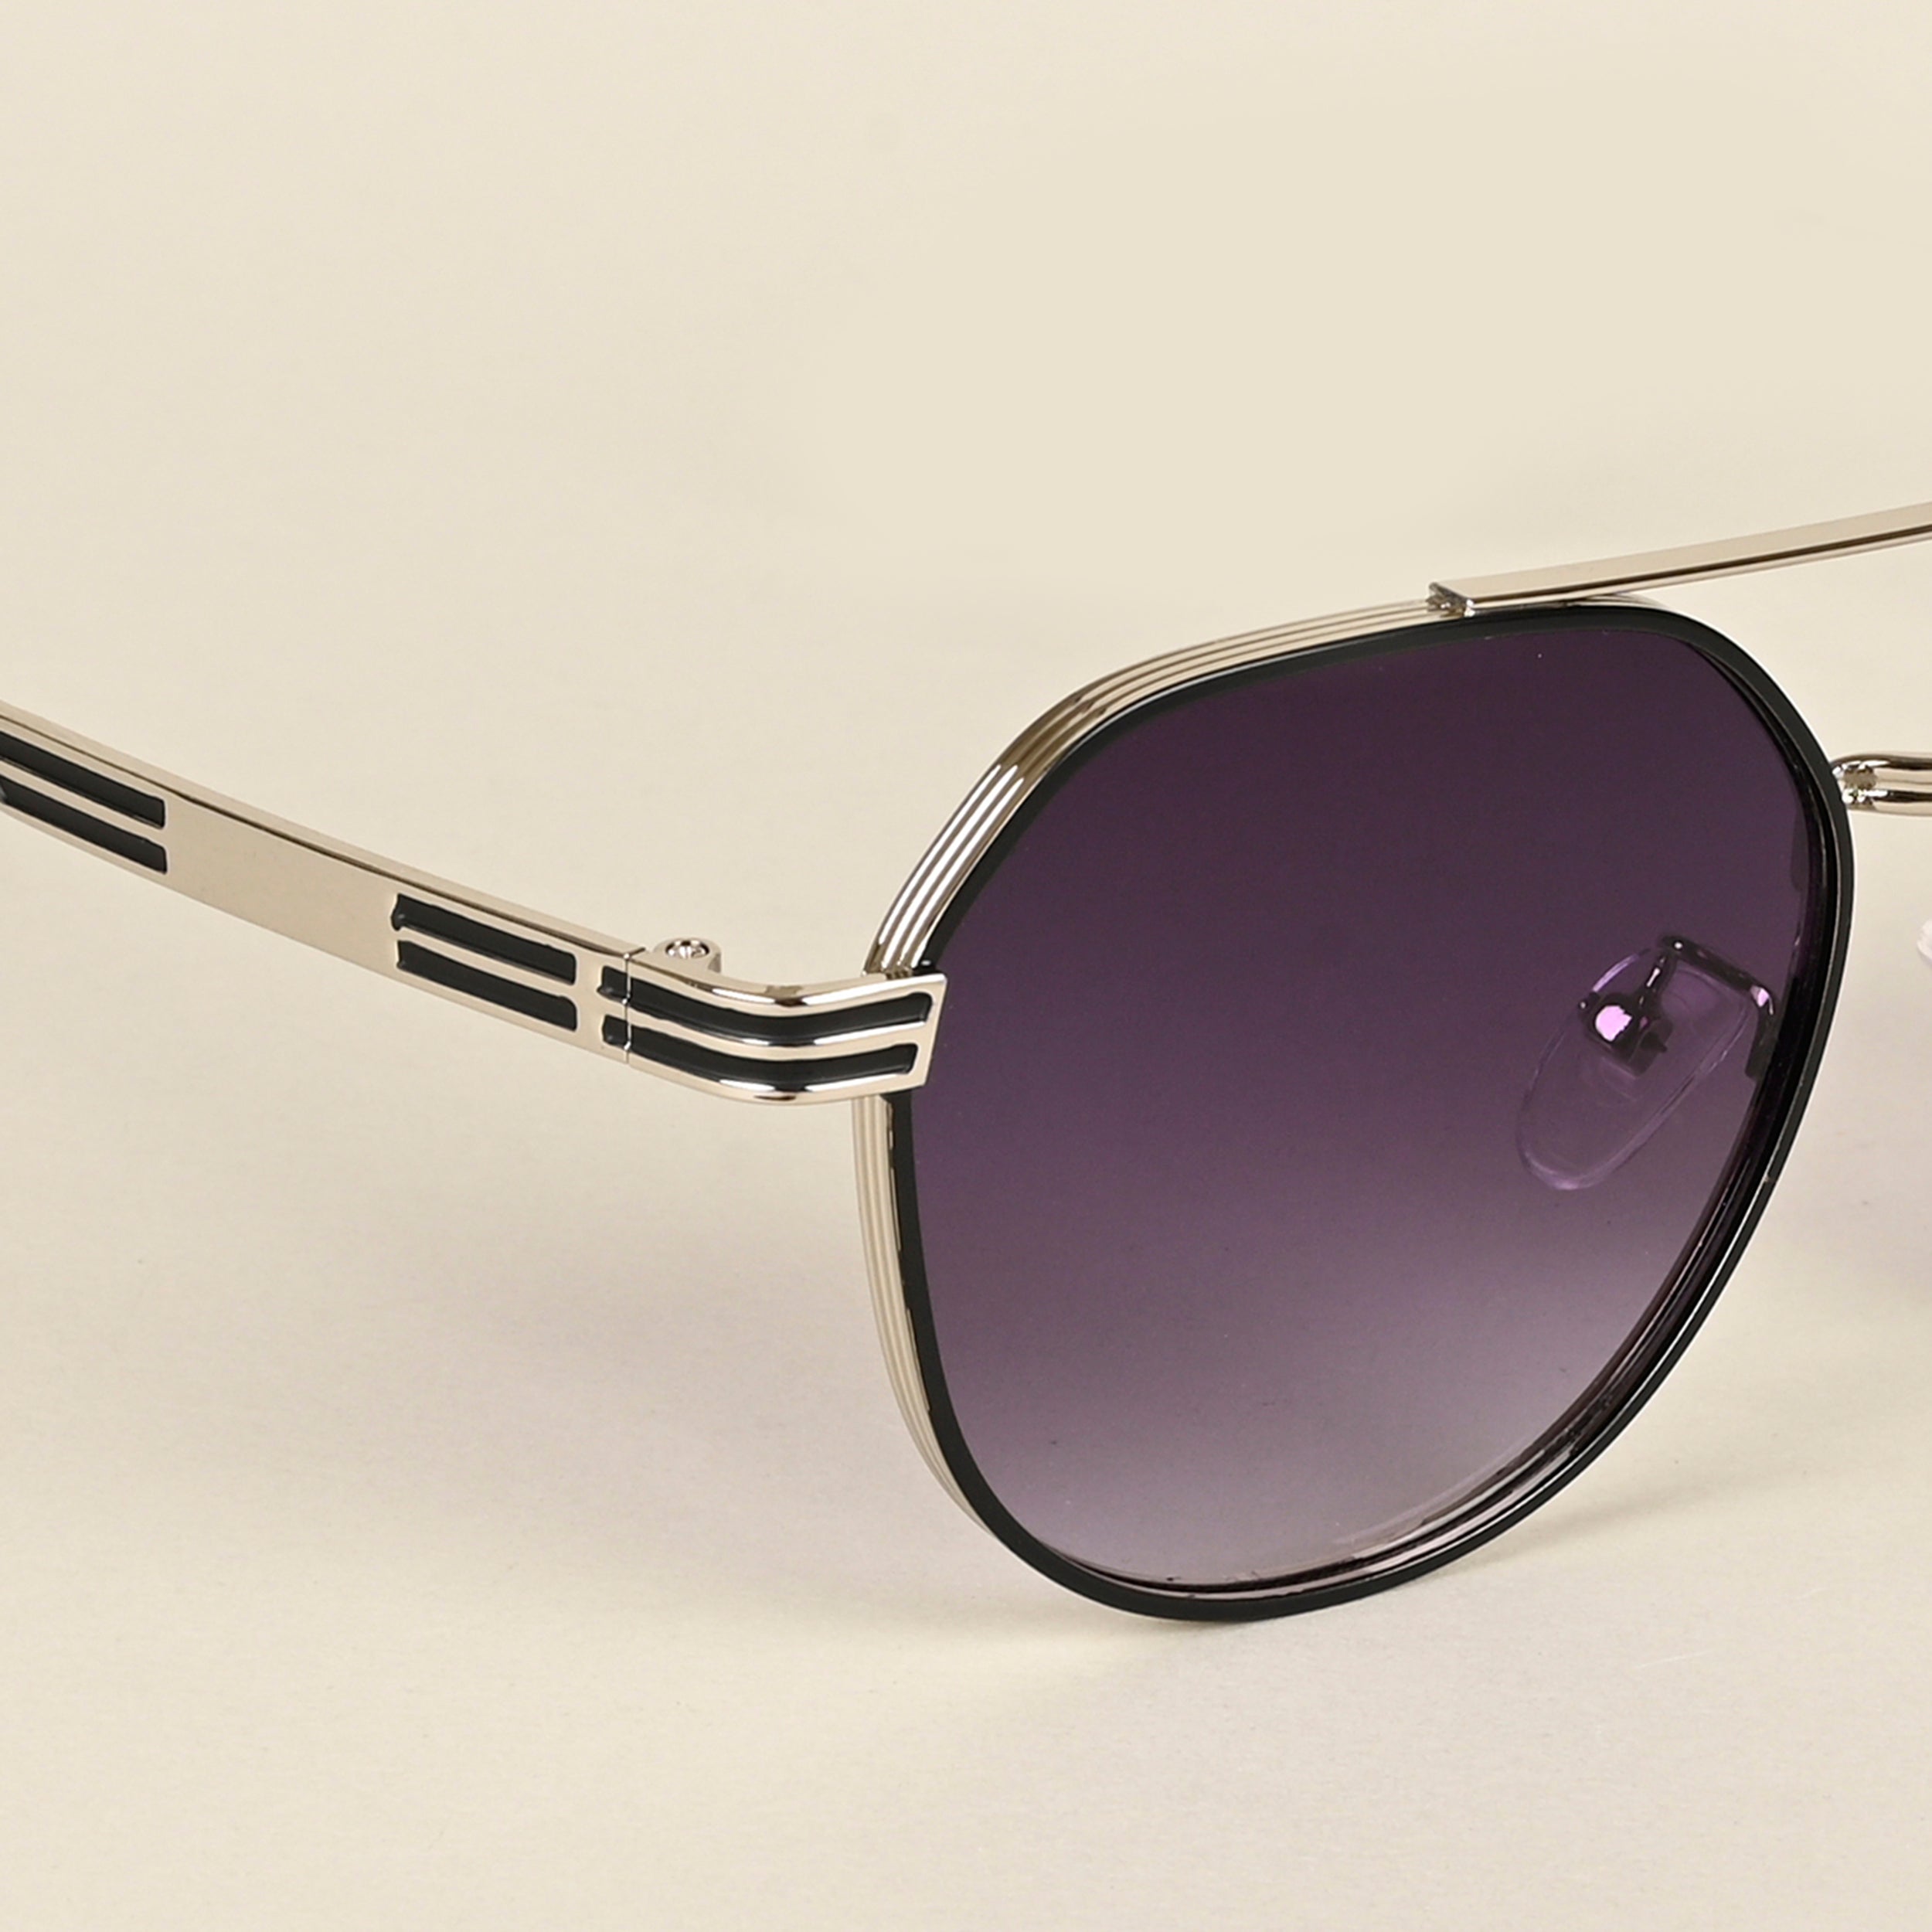 Voyage Purple & Clear Round Sunglasses for Men & Women (8950MG4333)